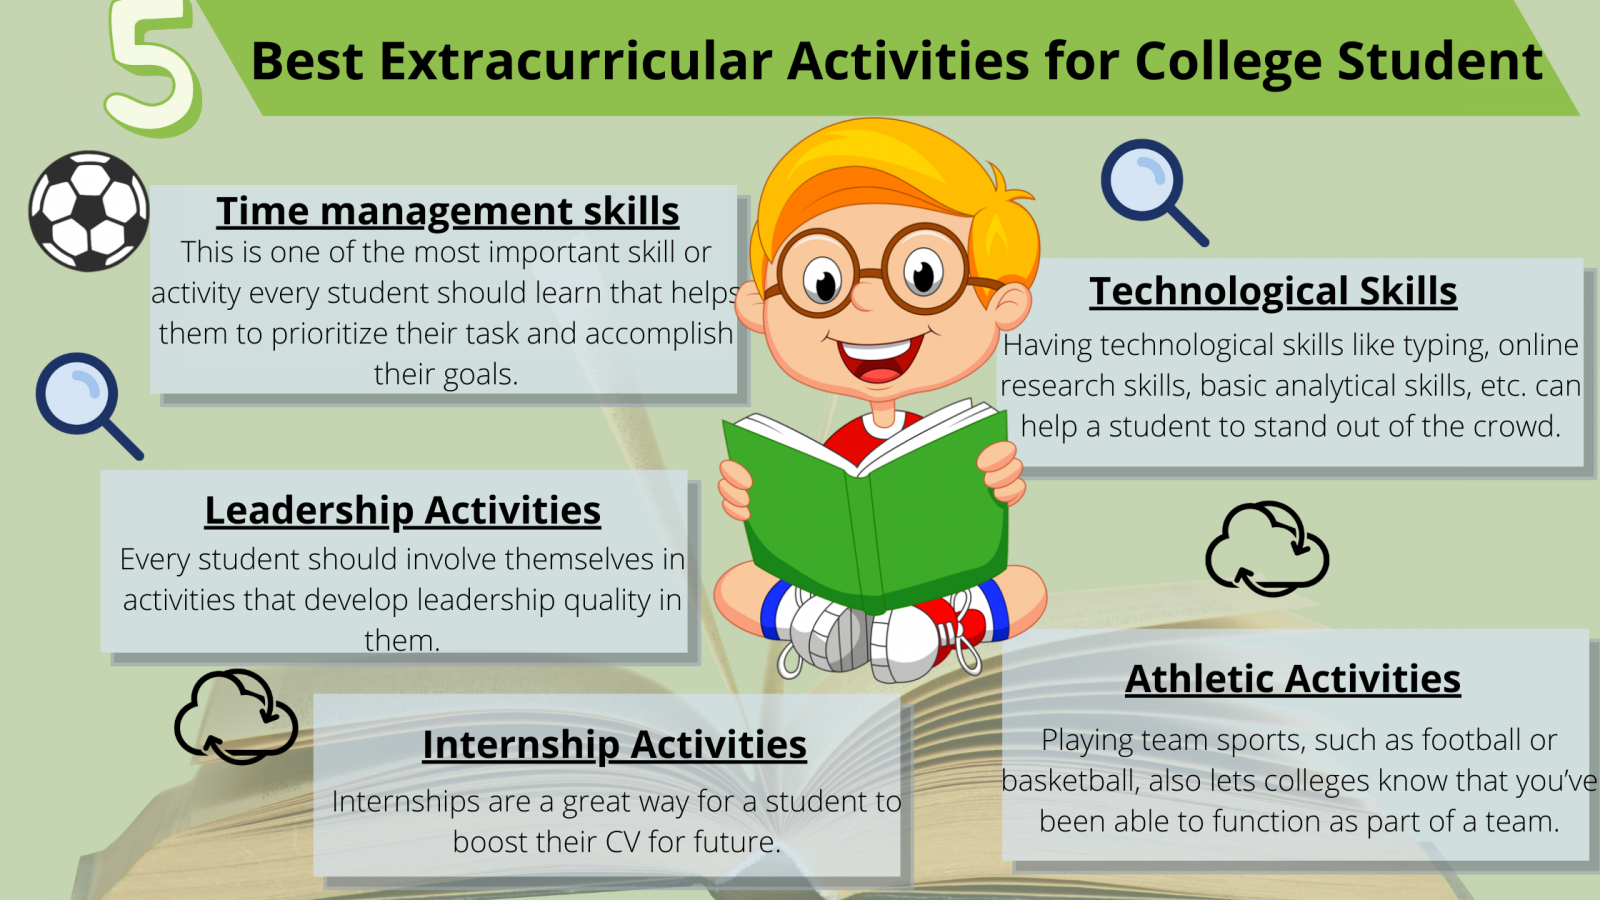 5 Best Extracurricular Activities for College Students